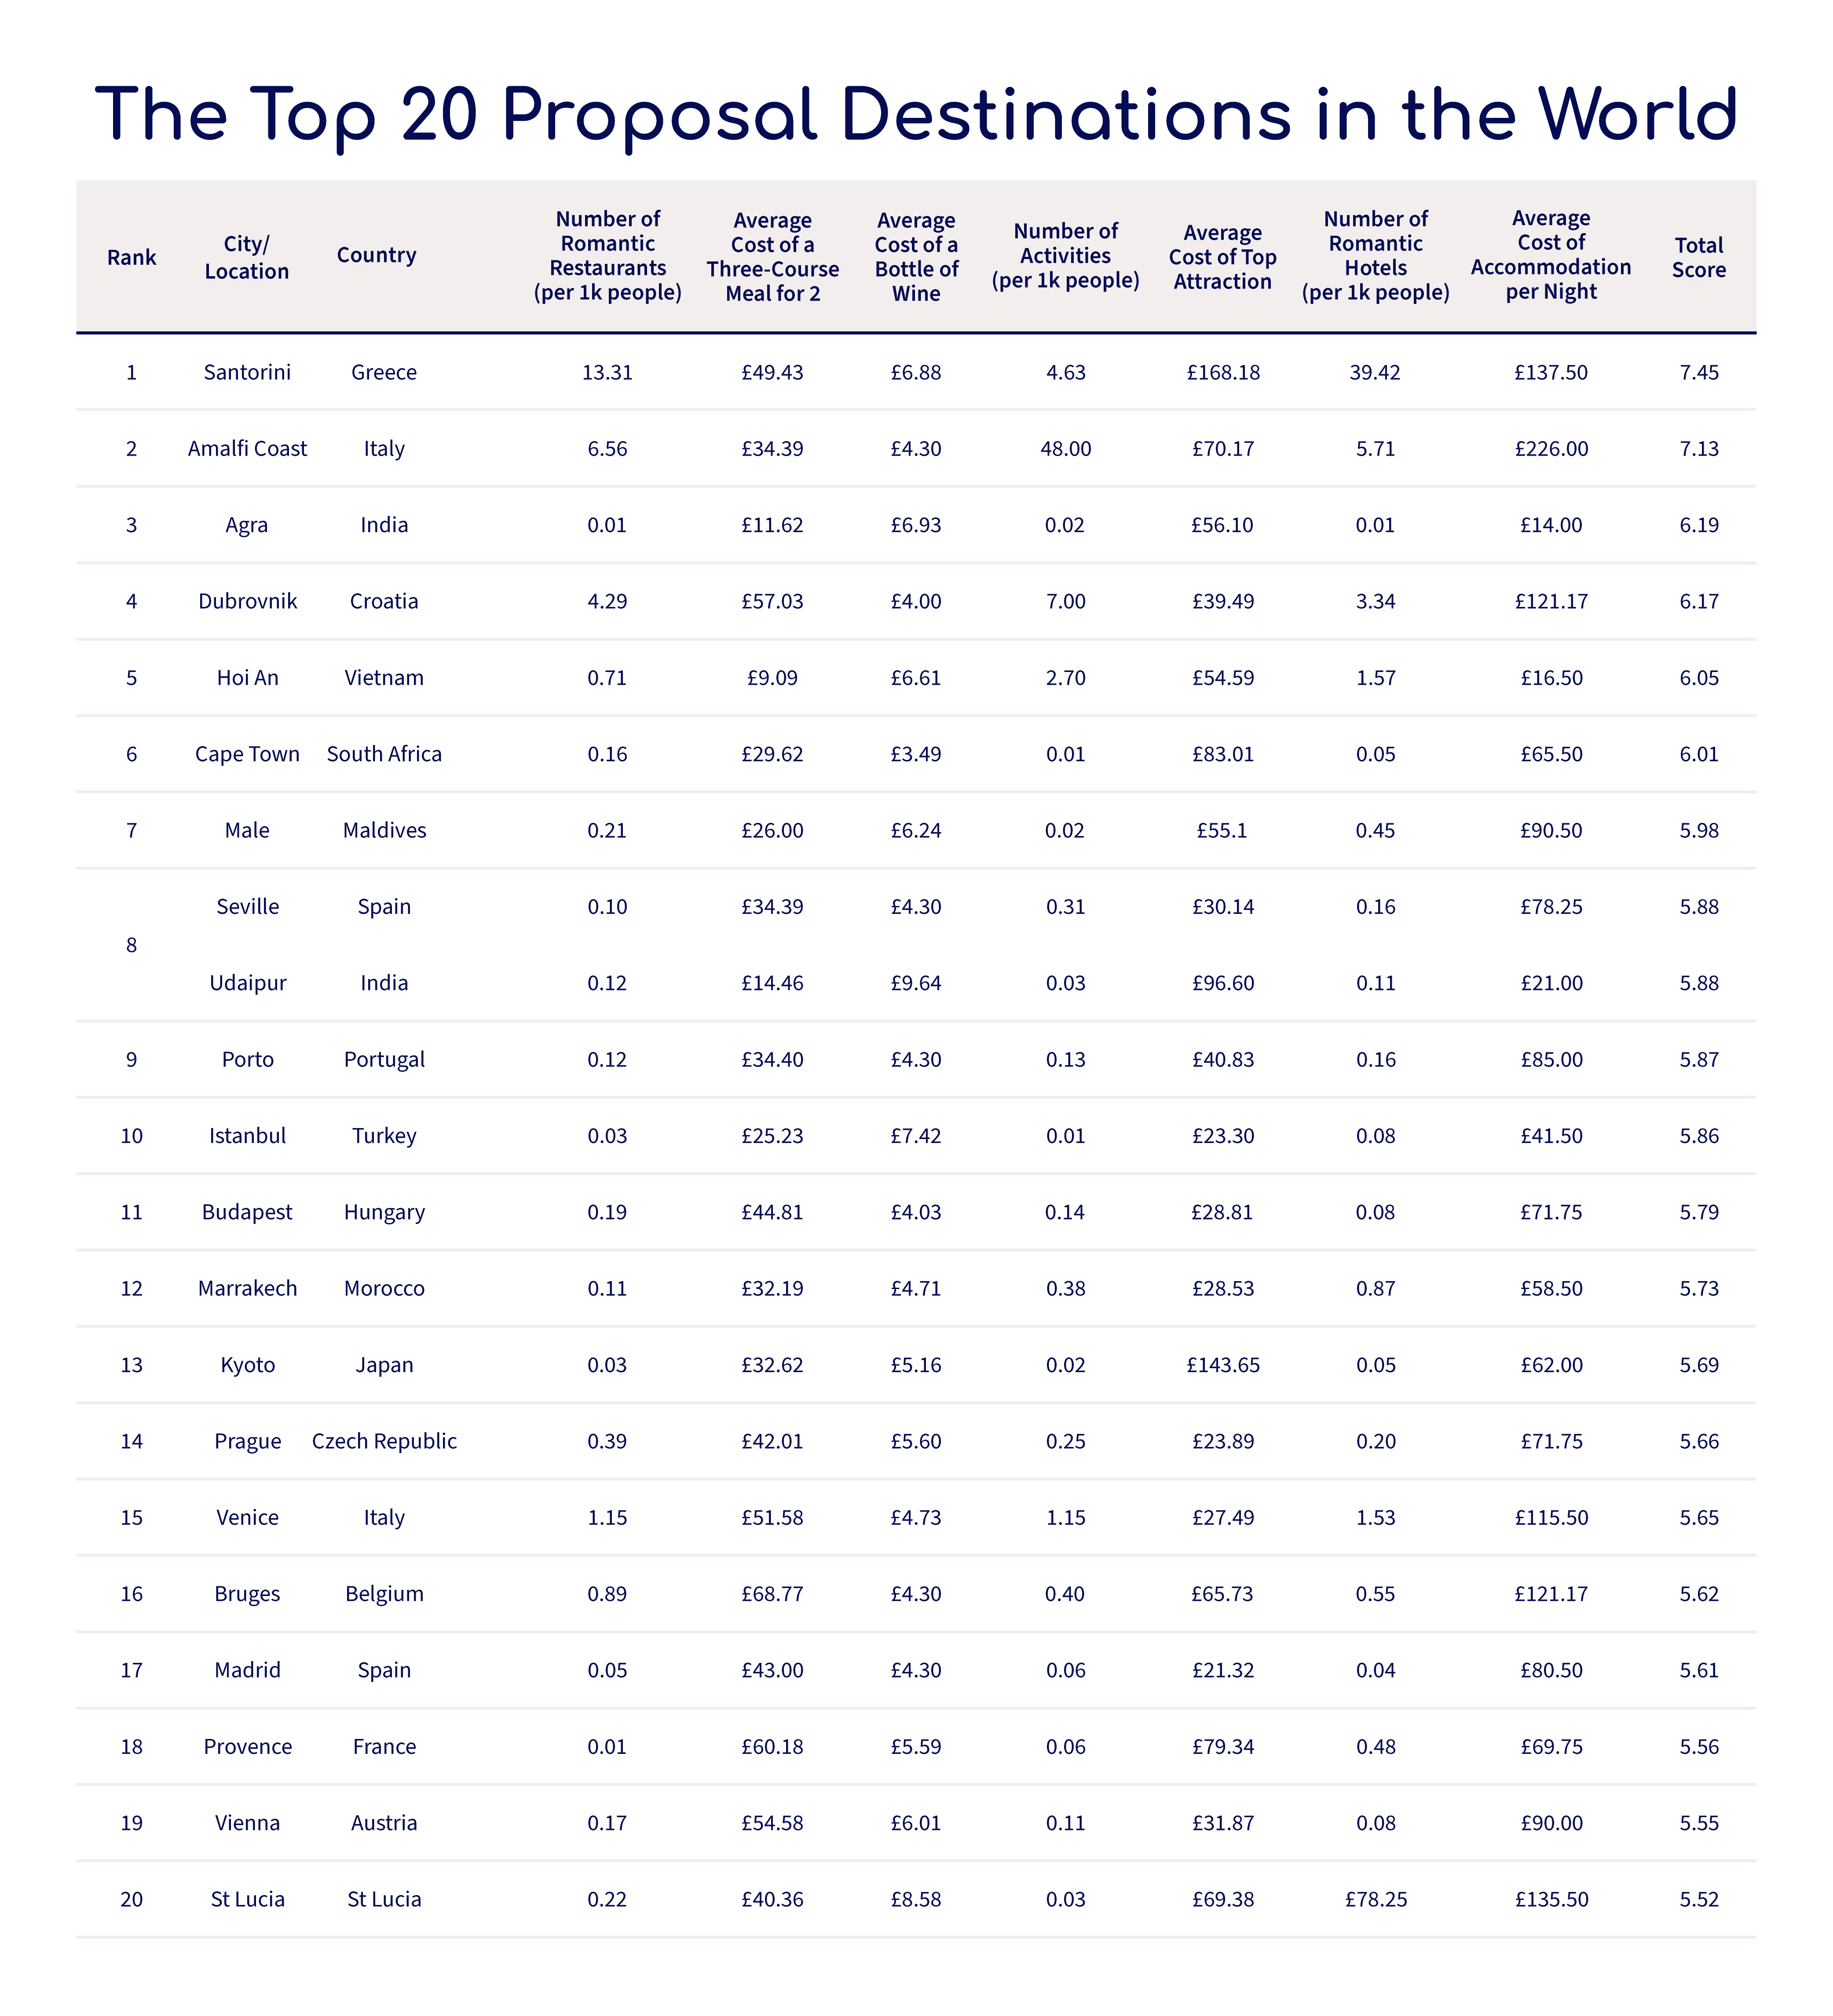 The Top 20 Destinations For Proposals In The World